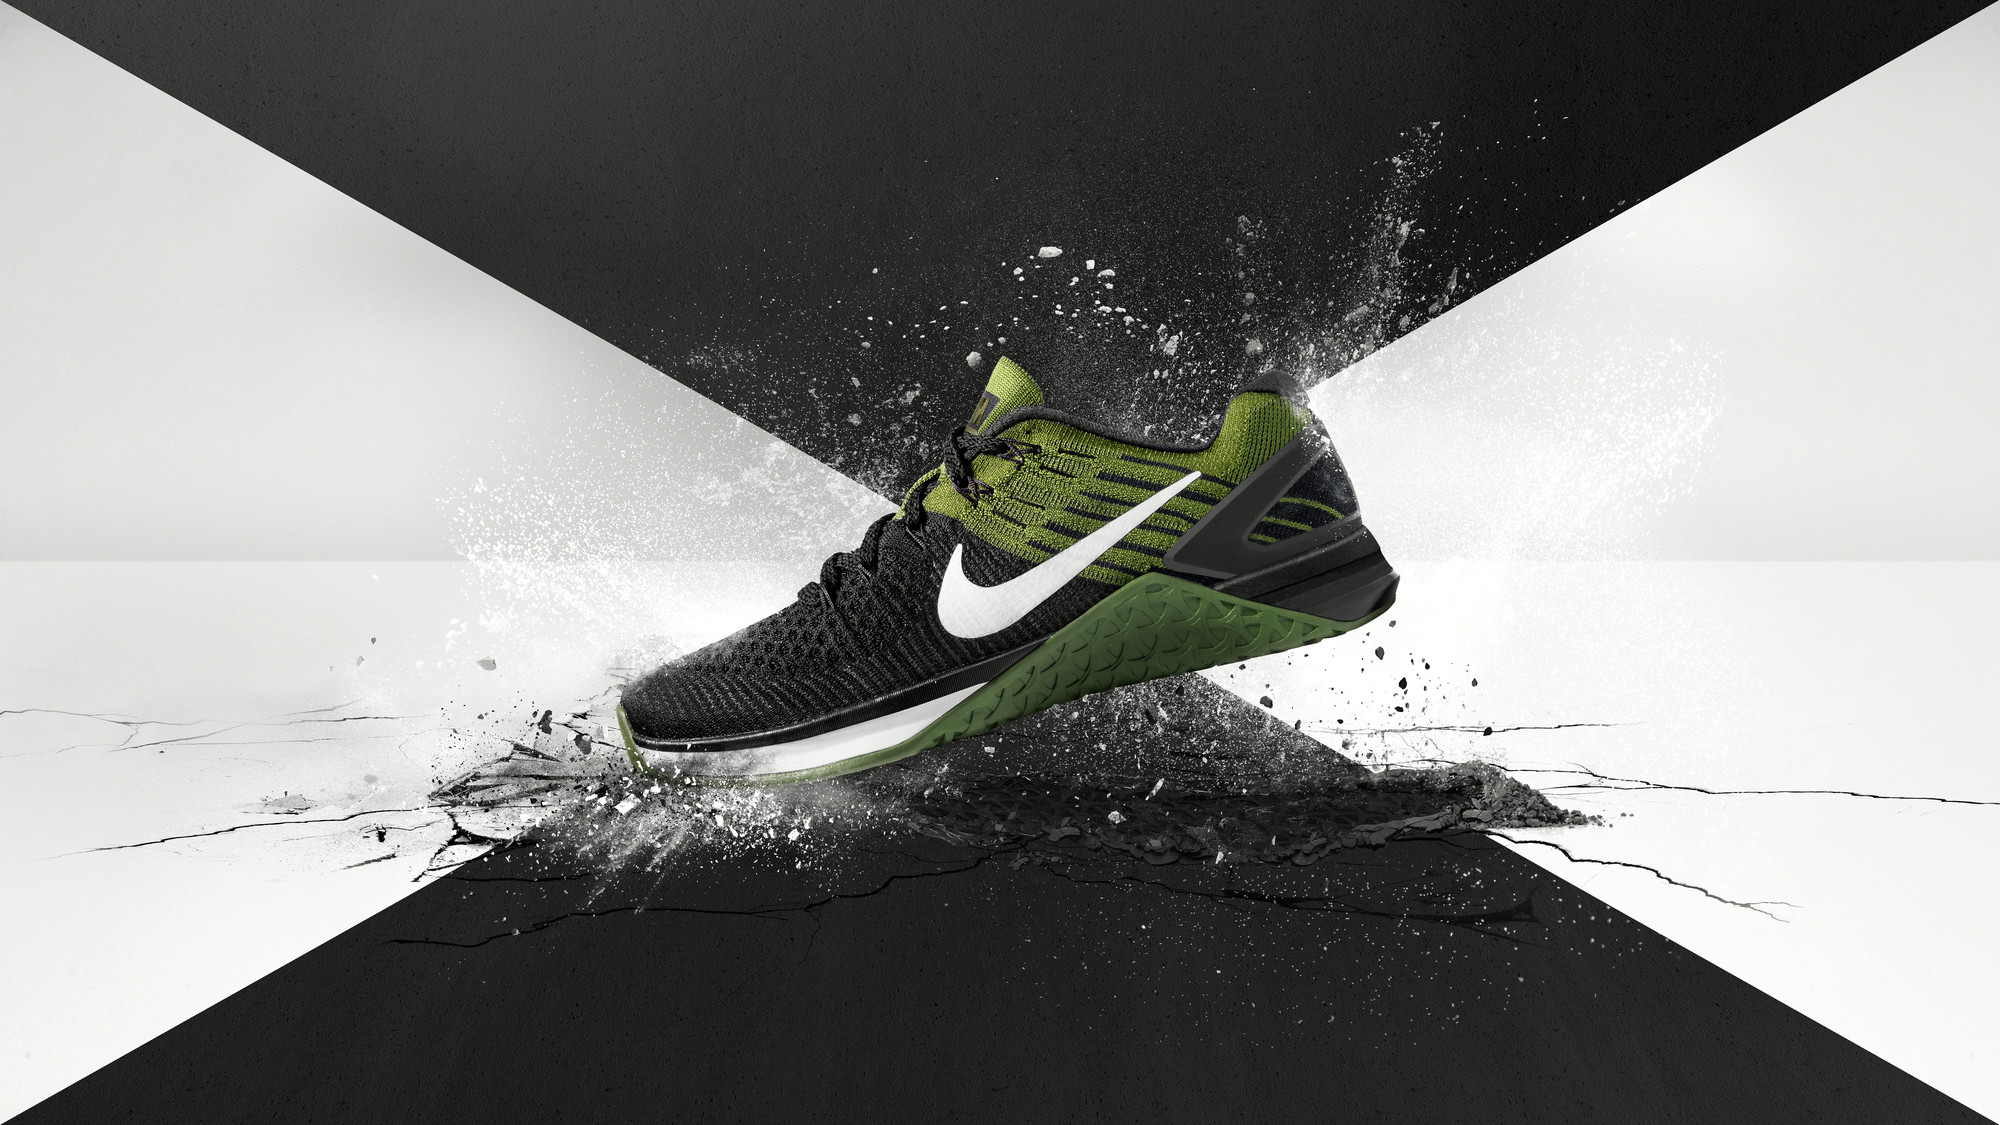 Official Photos of Nike Metcon 3! (And 